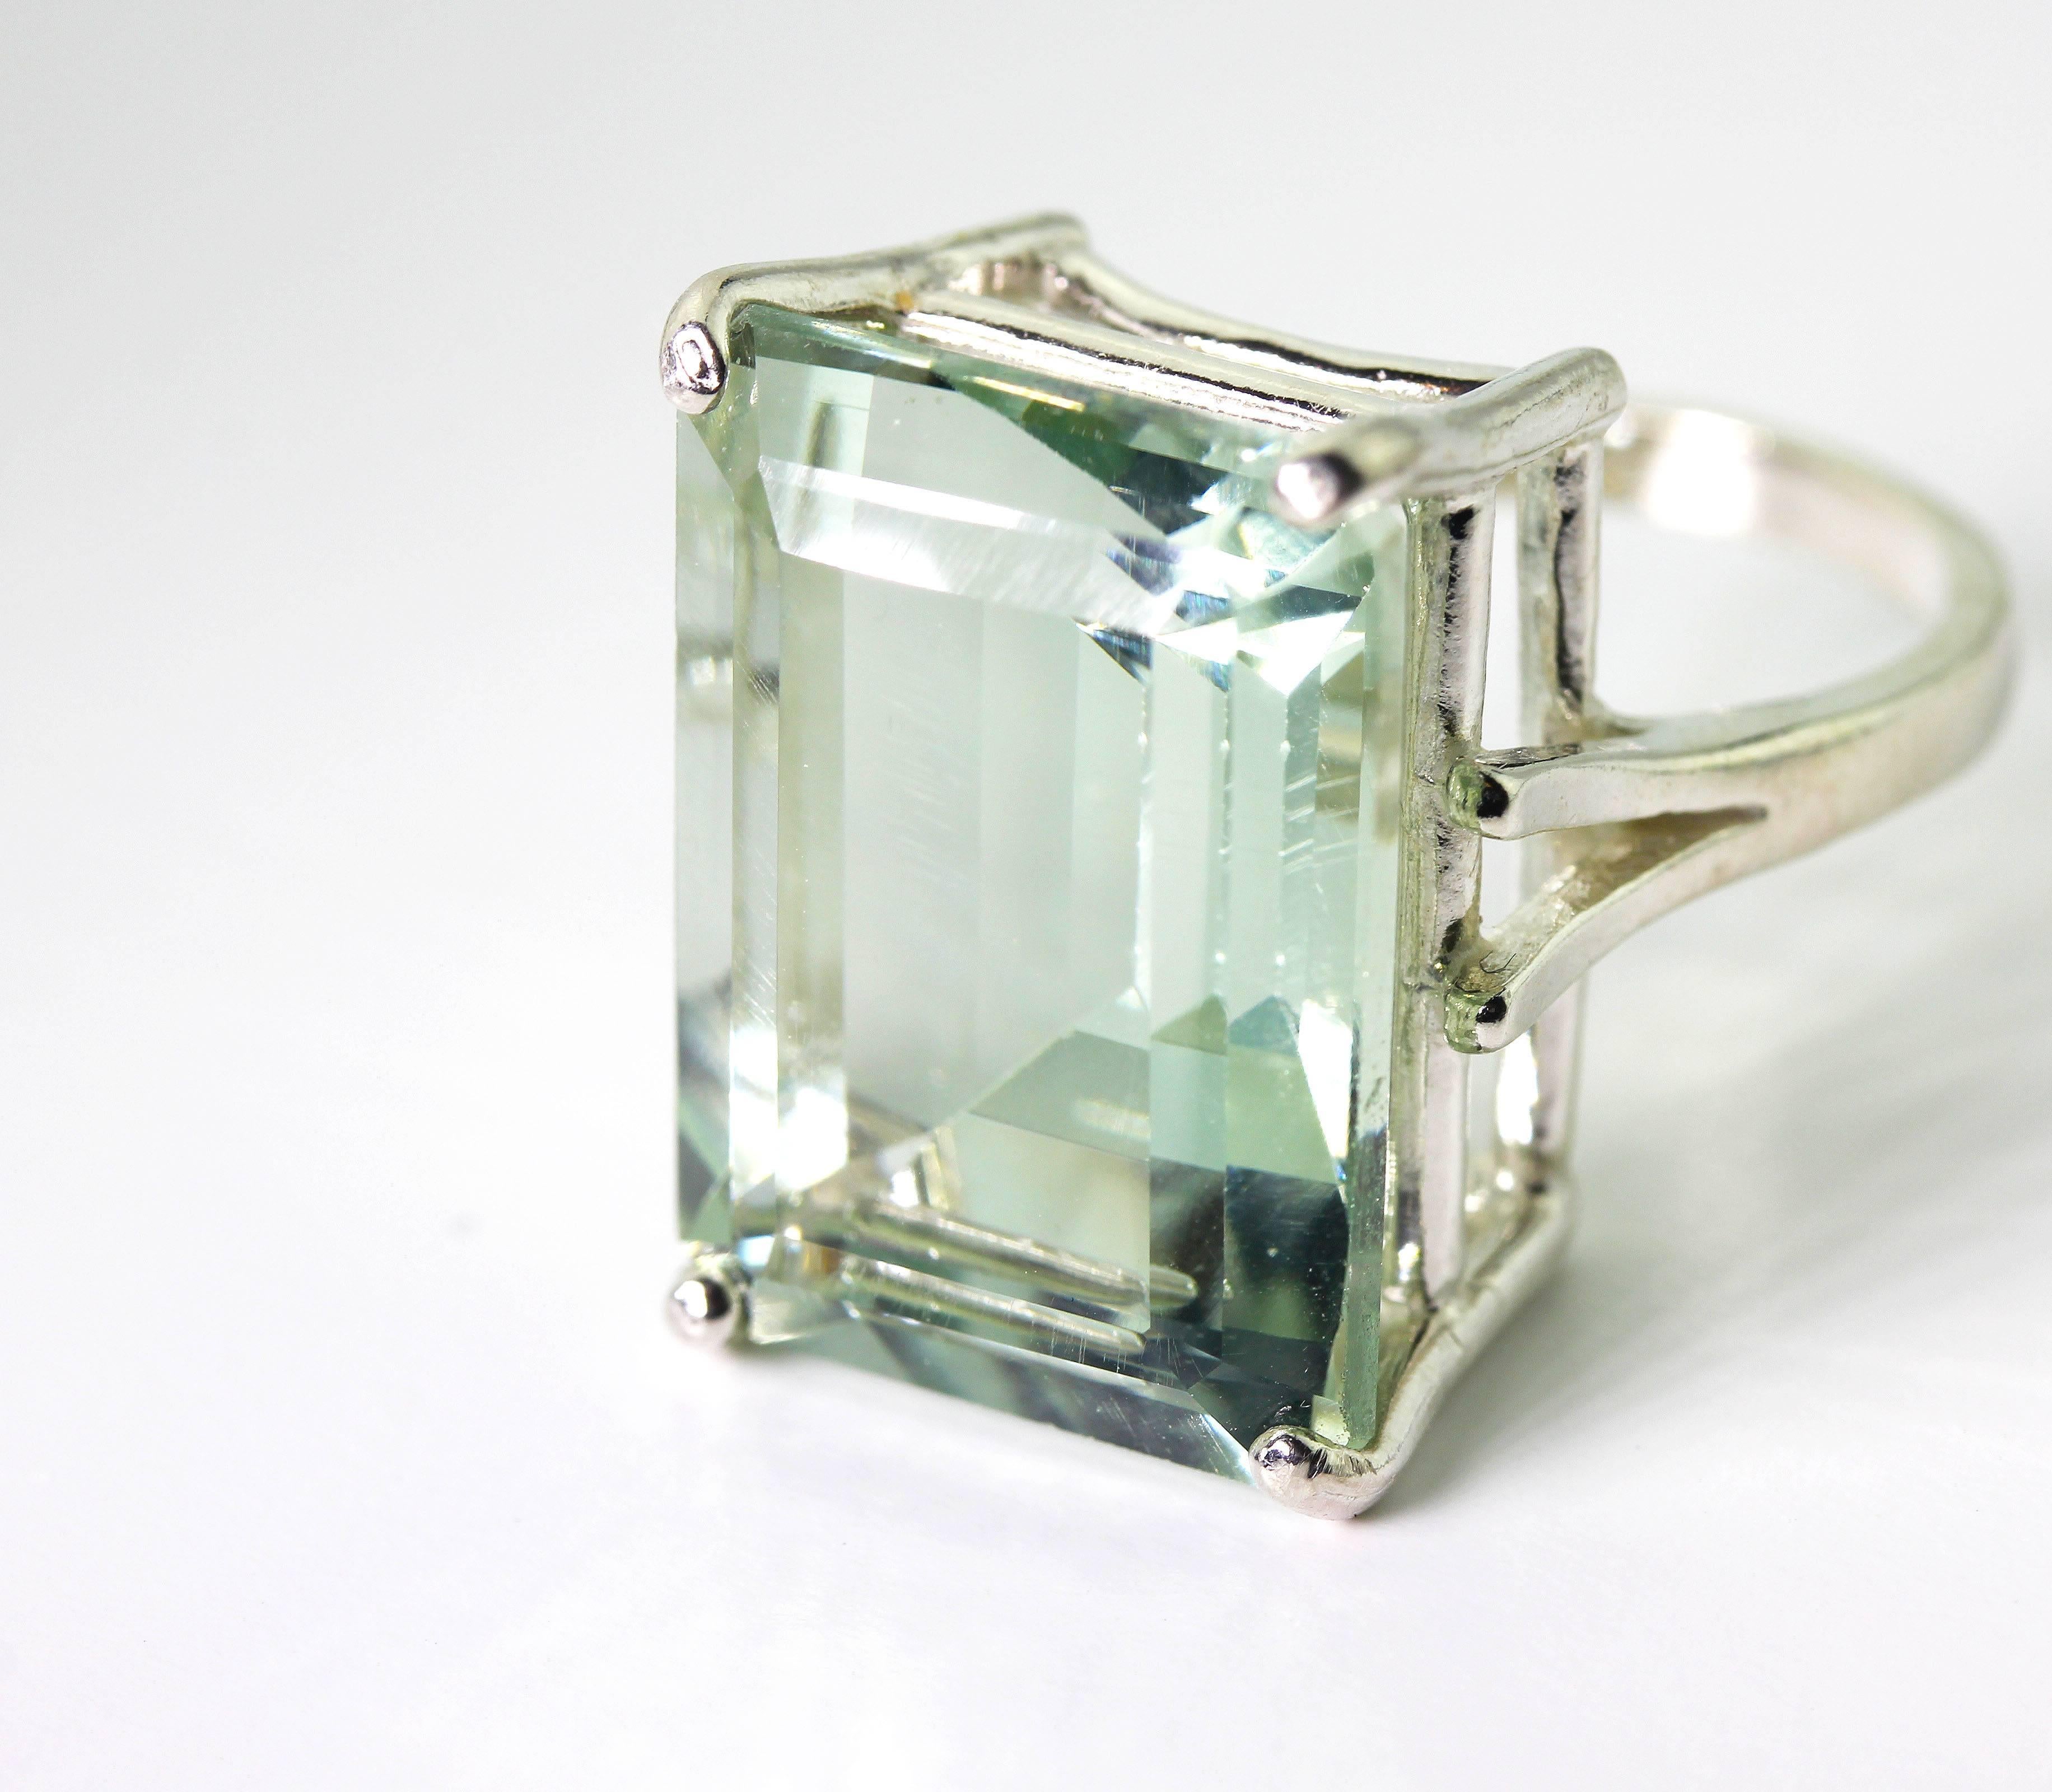 This clean huge beautiful brilliant 23.95 carat Prasiolite is set in sterling silver ring and is really visually flawless. The ring is a size 7 (sizable). 